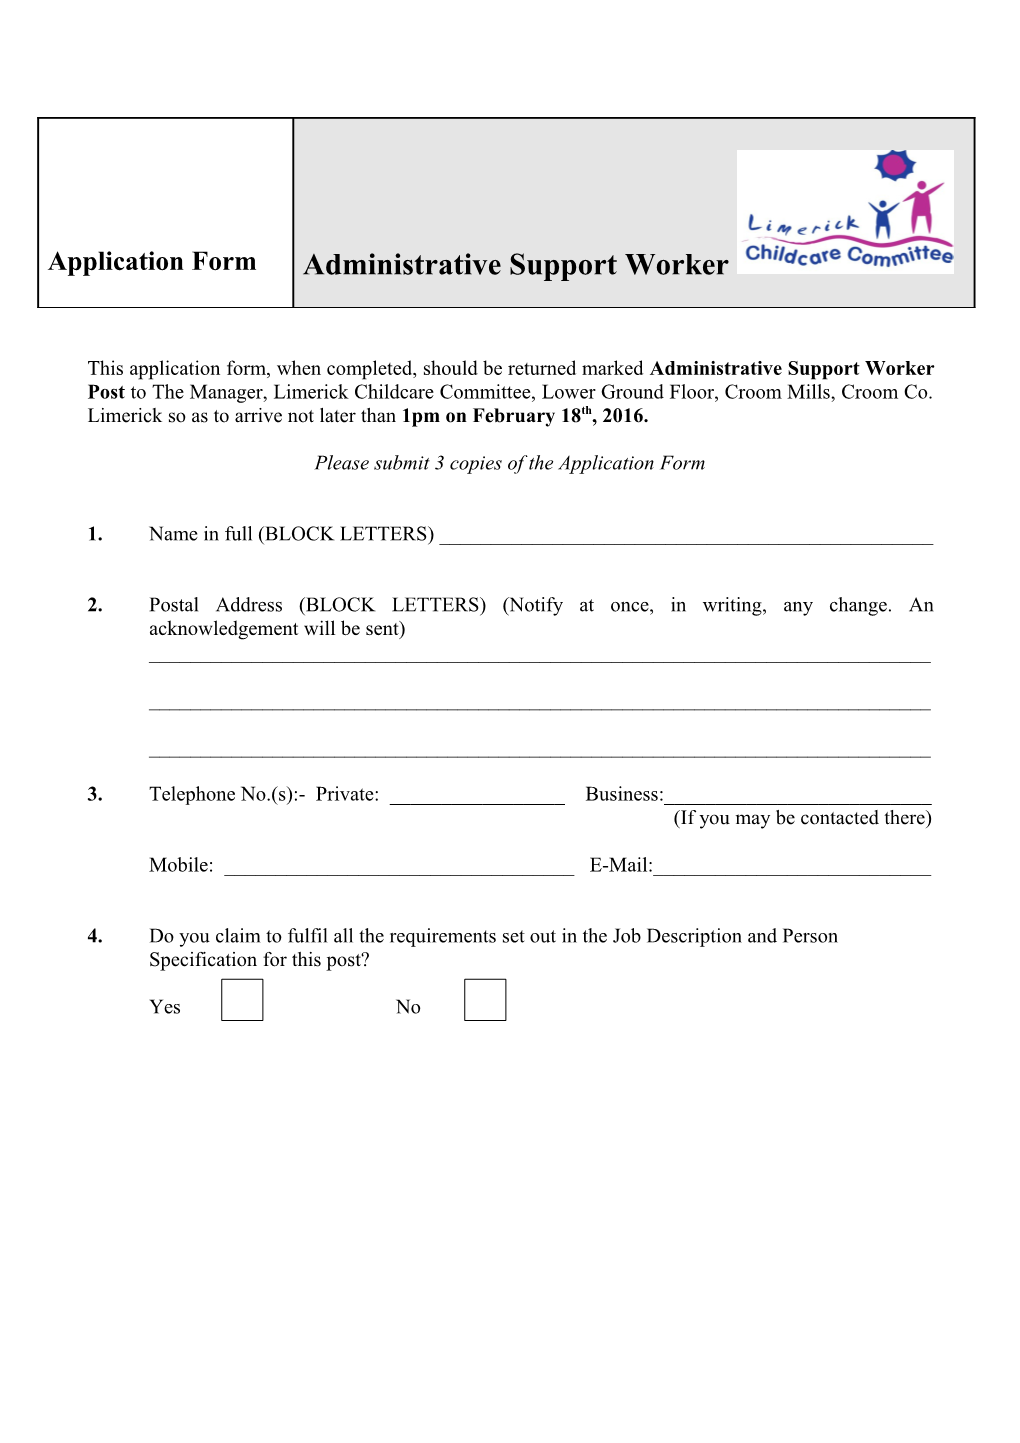 Please Submit 3 Copies of the Application Form